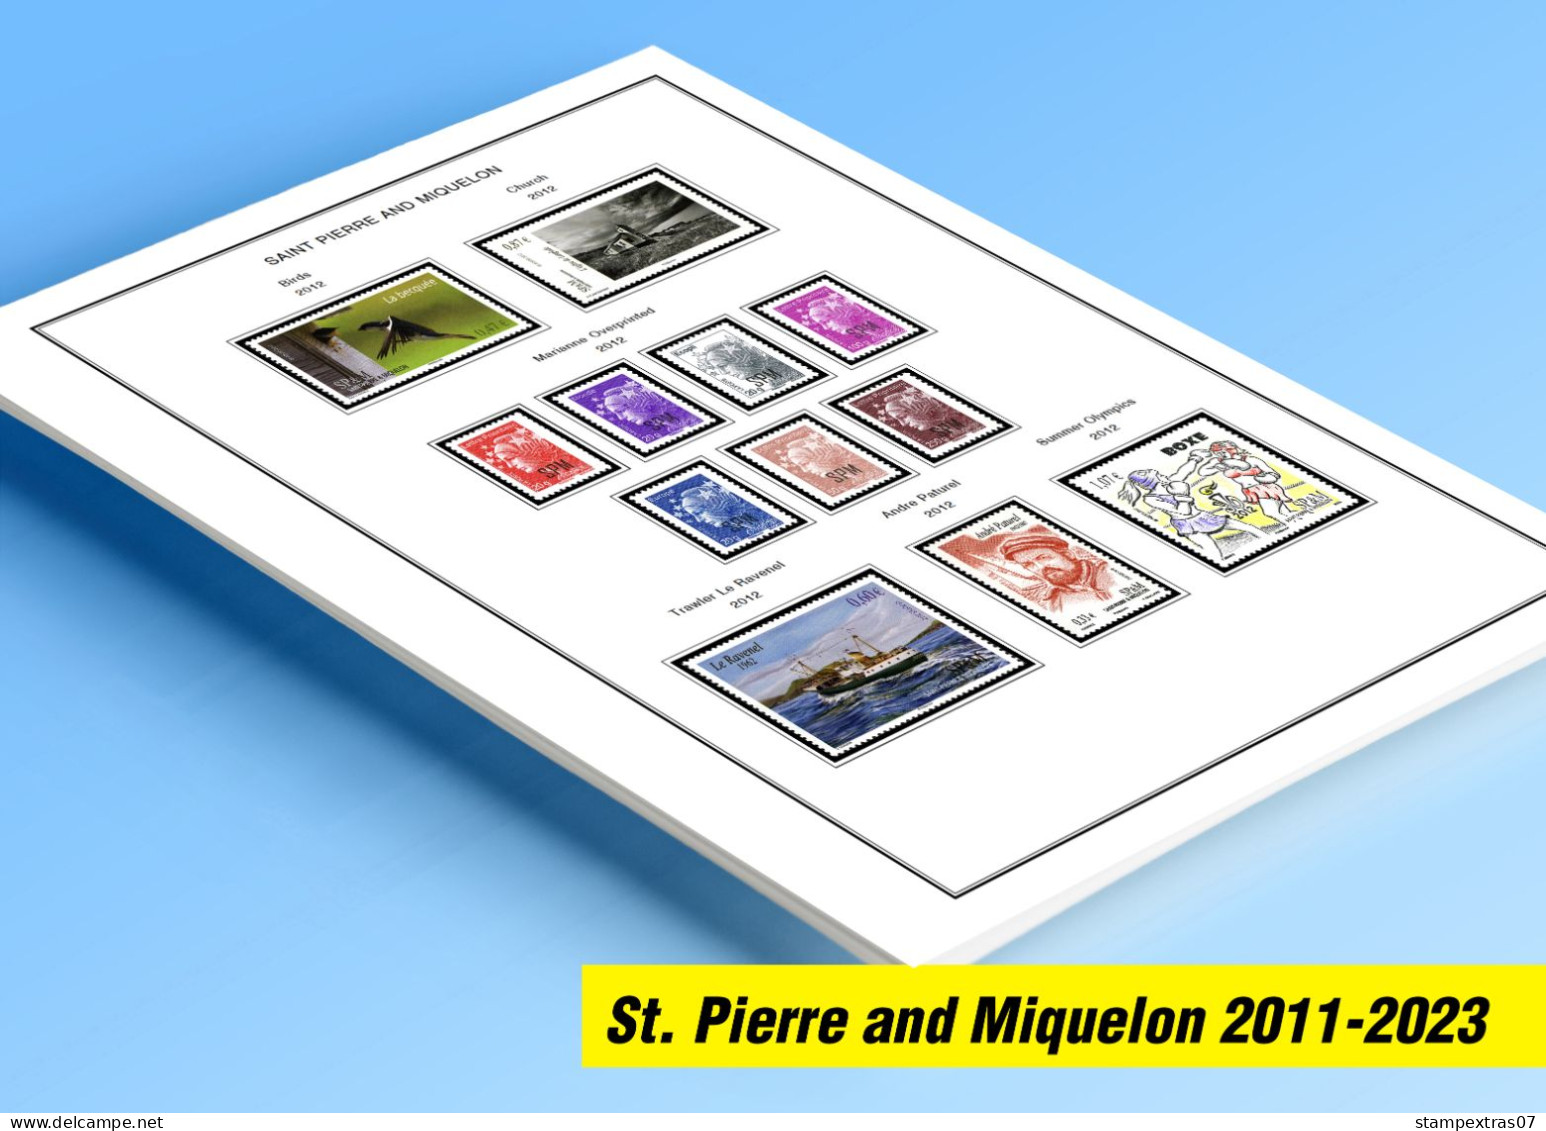 COLOR PRINTED SAINT PIERRE AND MIQUELON 2011-2023 STAMP ALBUM PAGES (49 Illustrated Pages) >> FEUILLES ALBUM - Pre-printed Pages